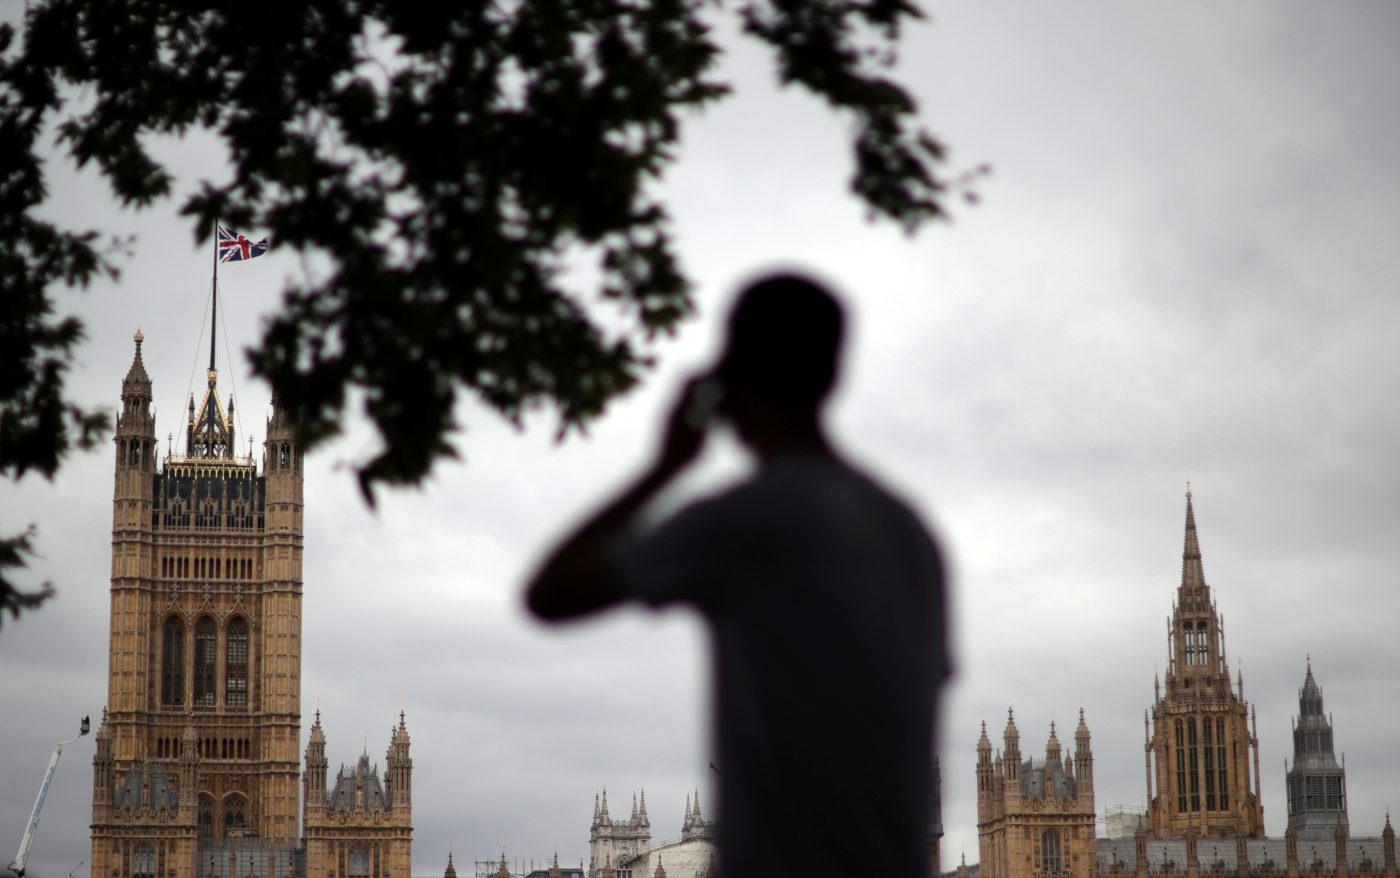 Photo: A man talks on his mobile phone in front of the Houses of Parliament in London, Britain, August 17, 2021. Credit: REUTERS/Hannah McKay